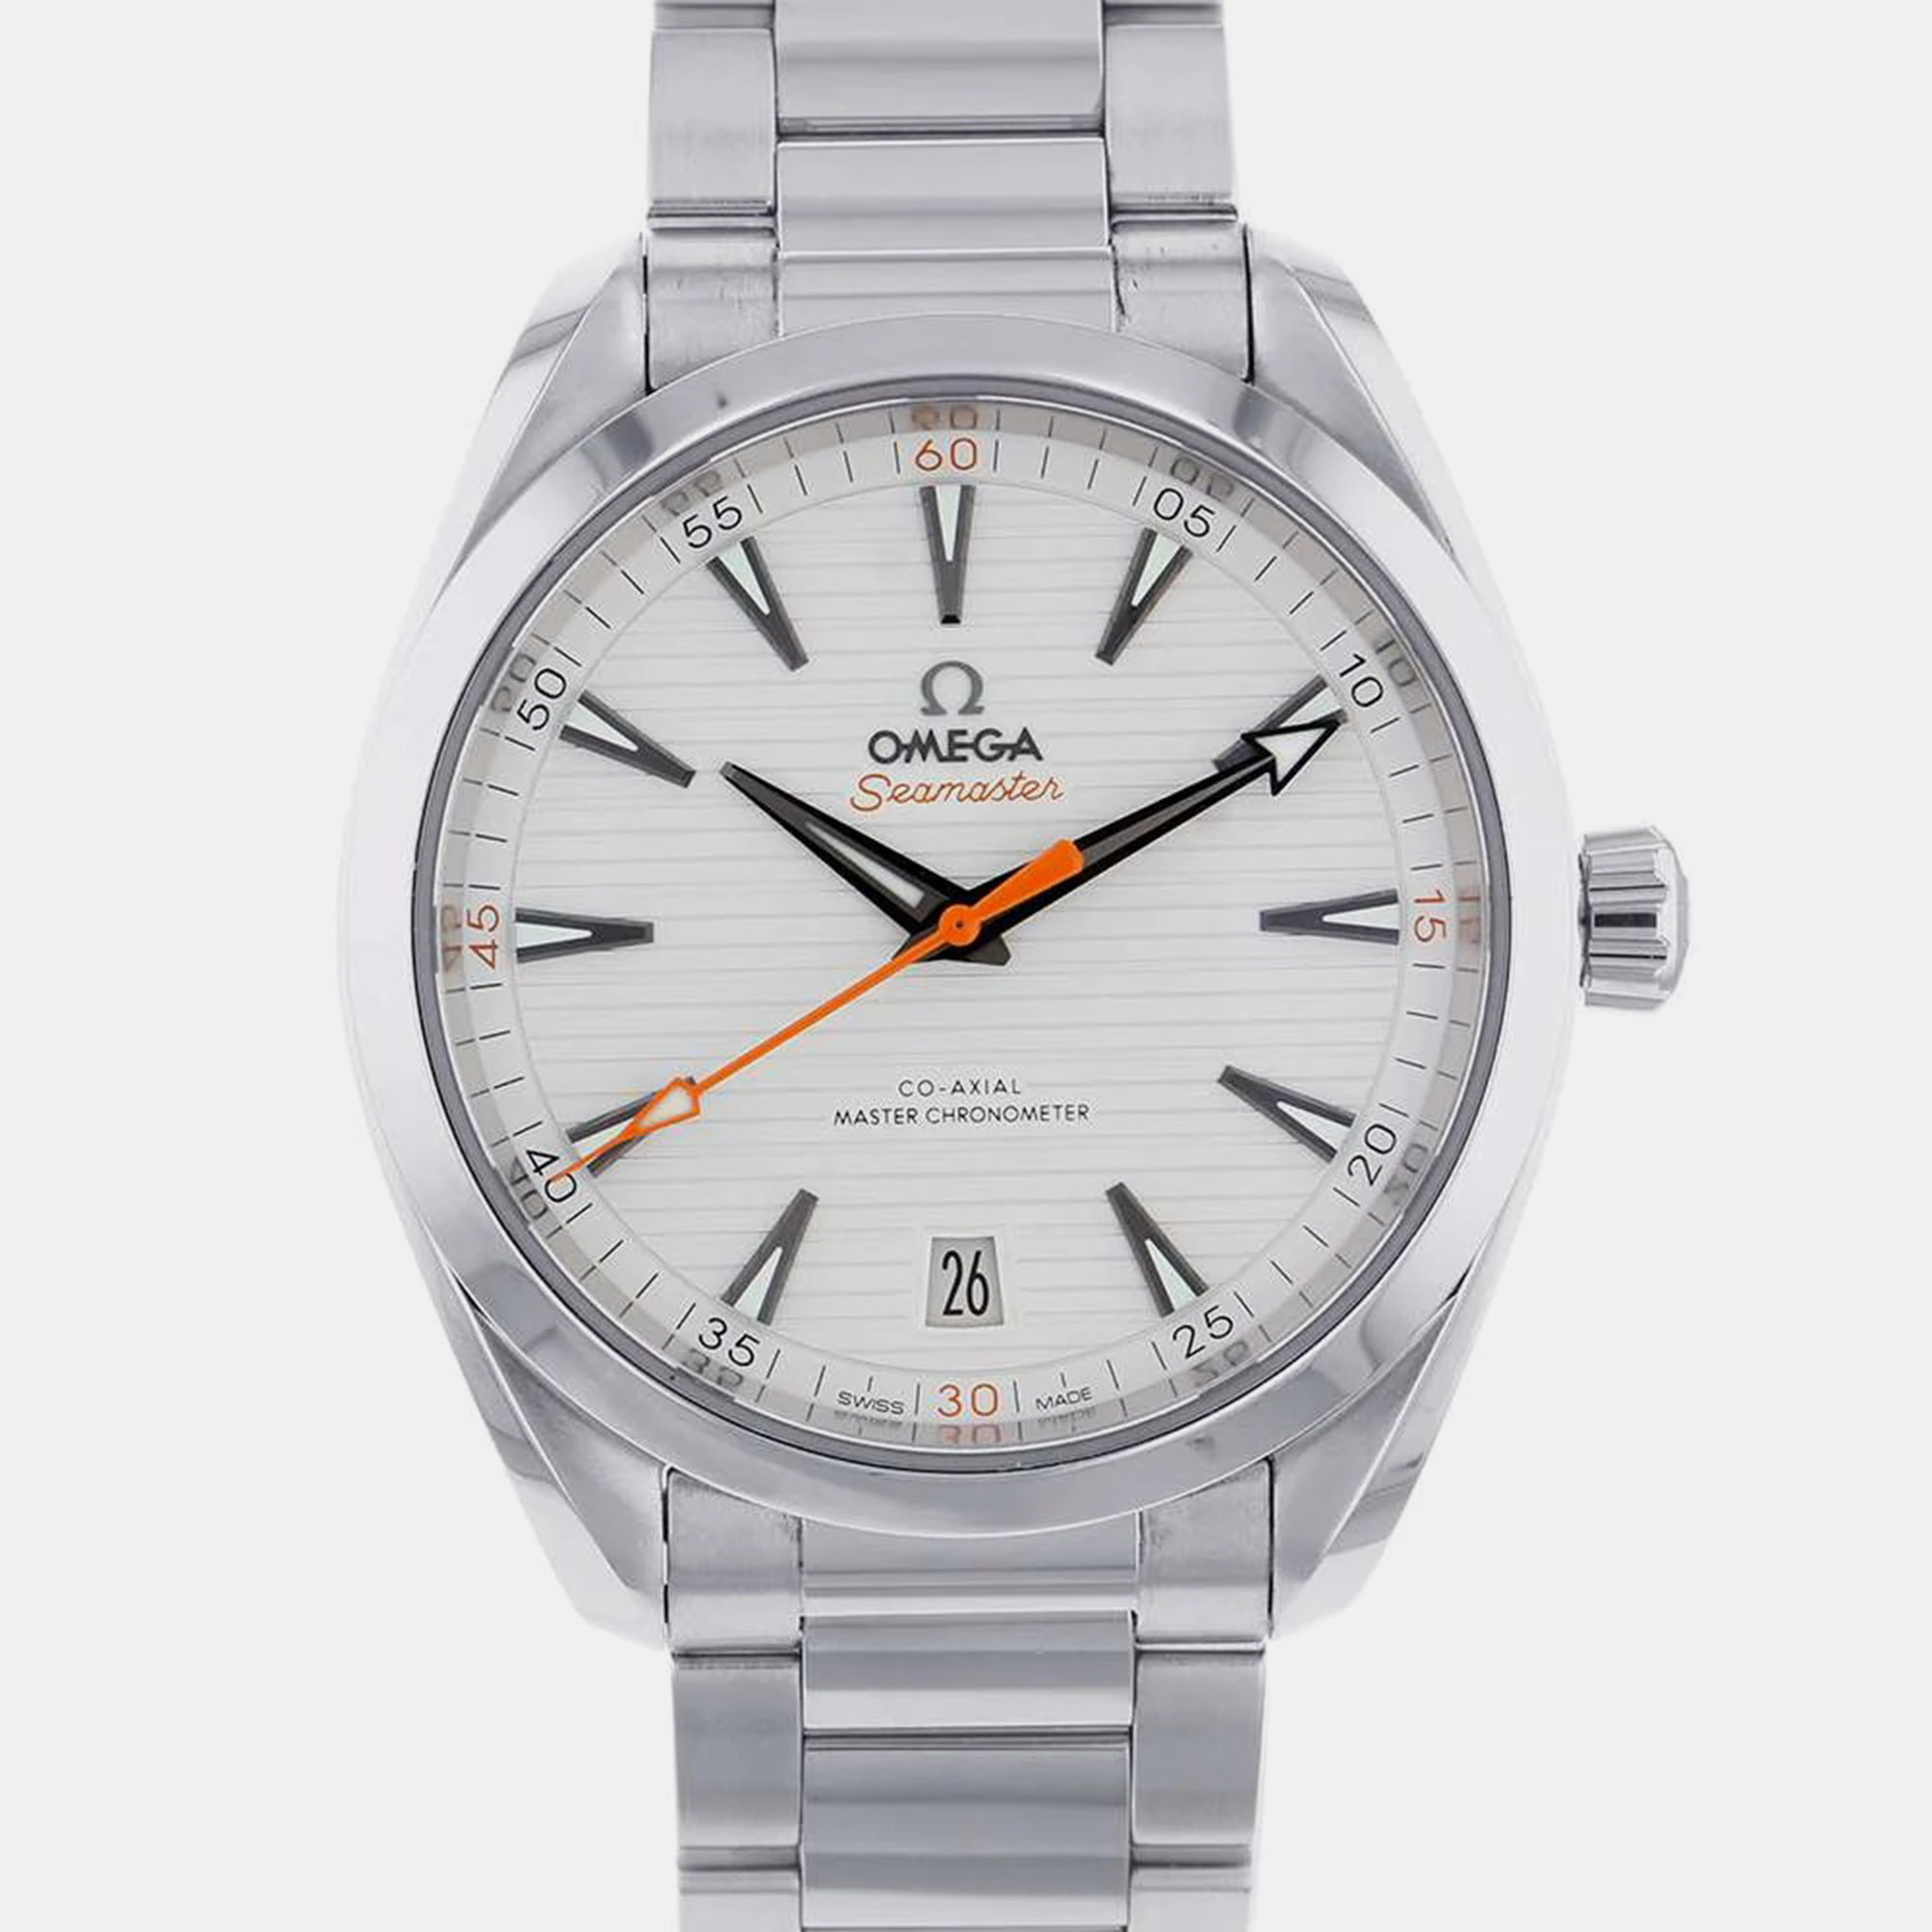 Omega silver stainless steel seamaster aqua terra  220.10.41.21.02.001 automatic men's wristwatch 41 mm